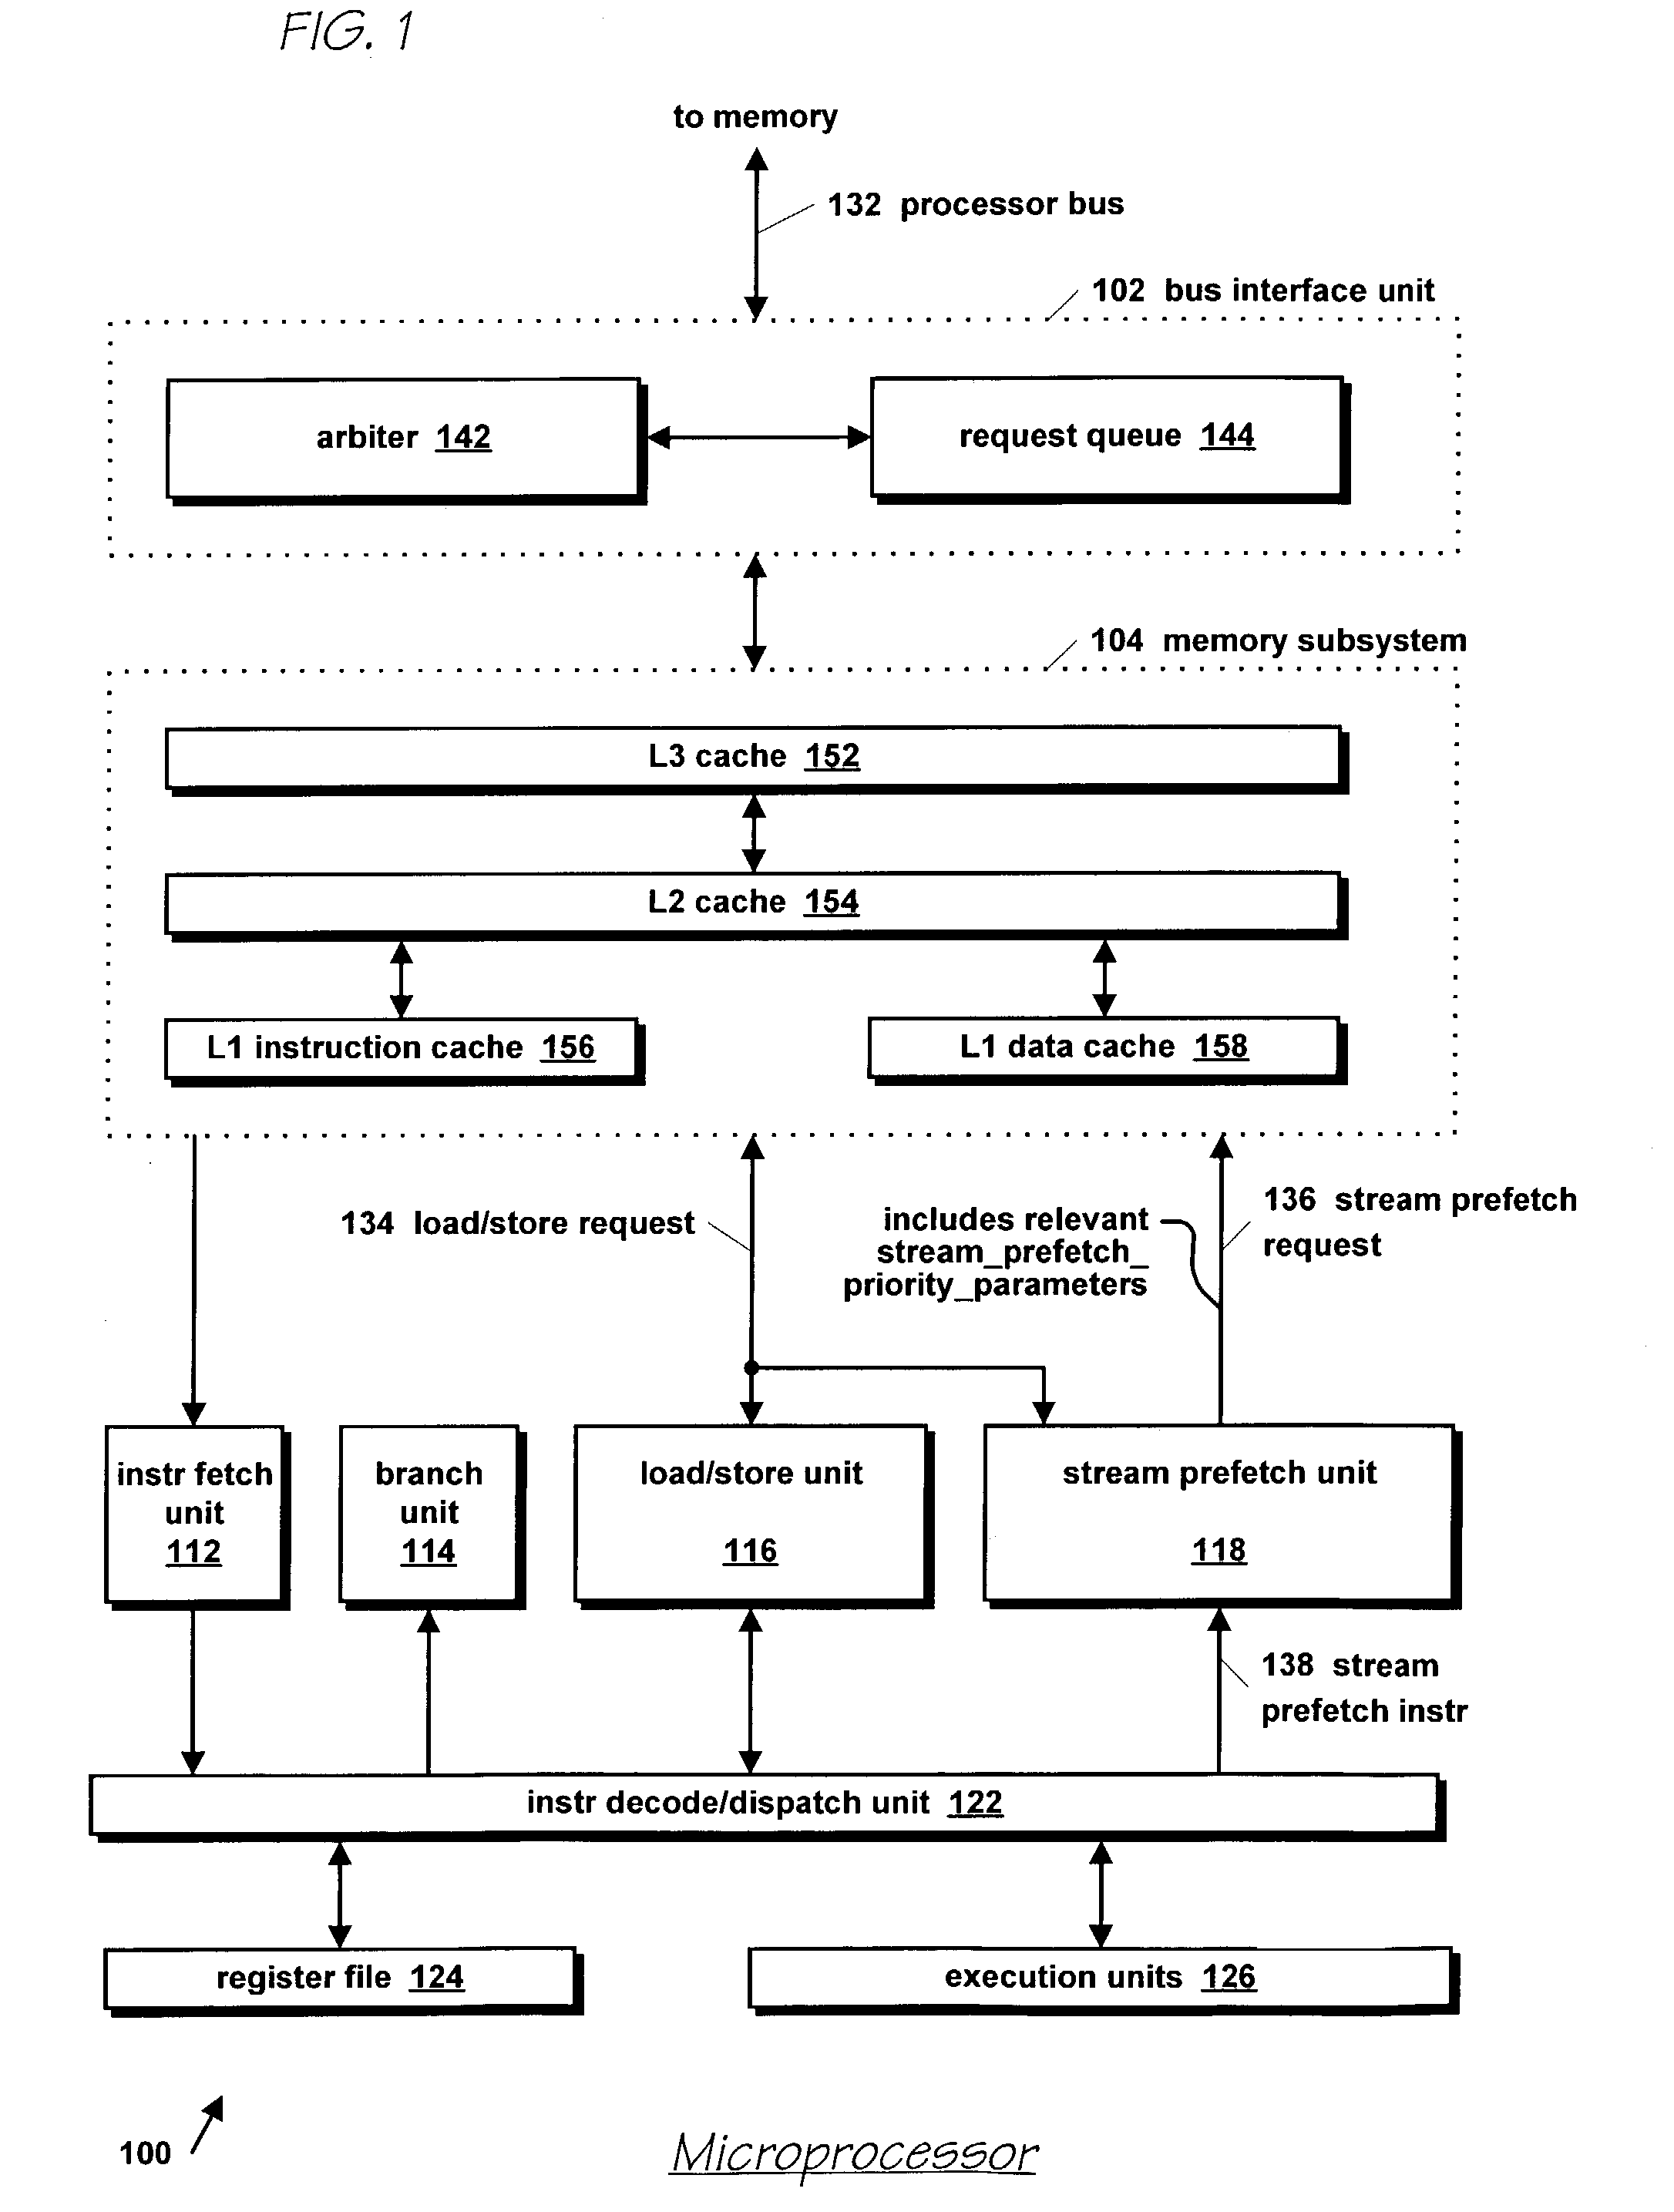 Microprocessor with improved data stream prefetching